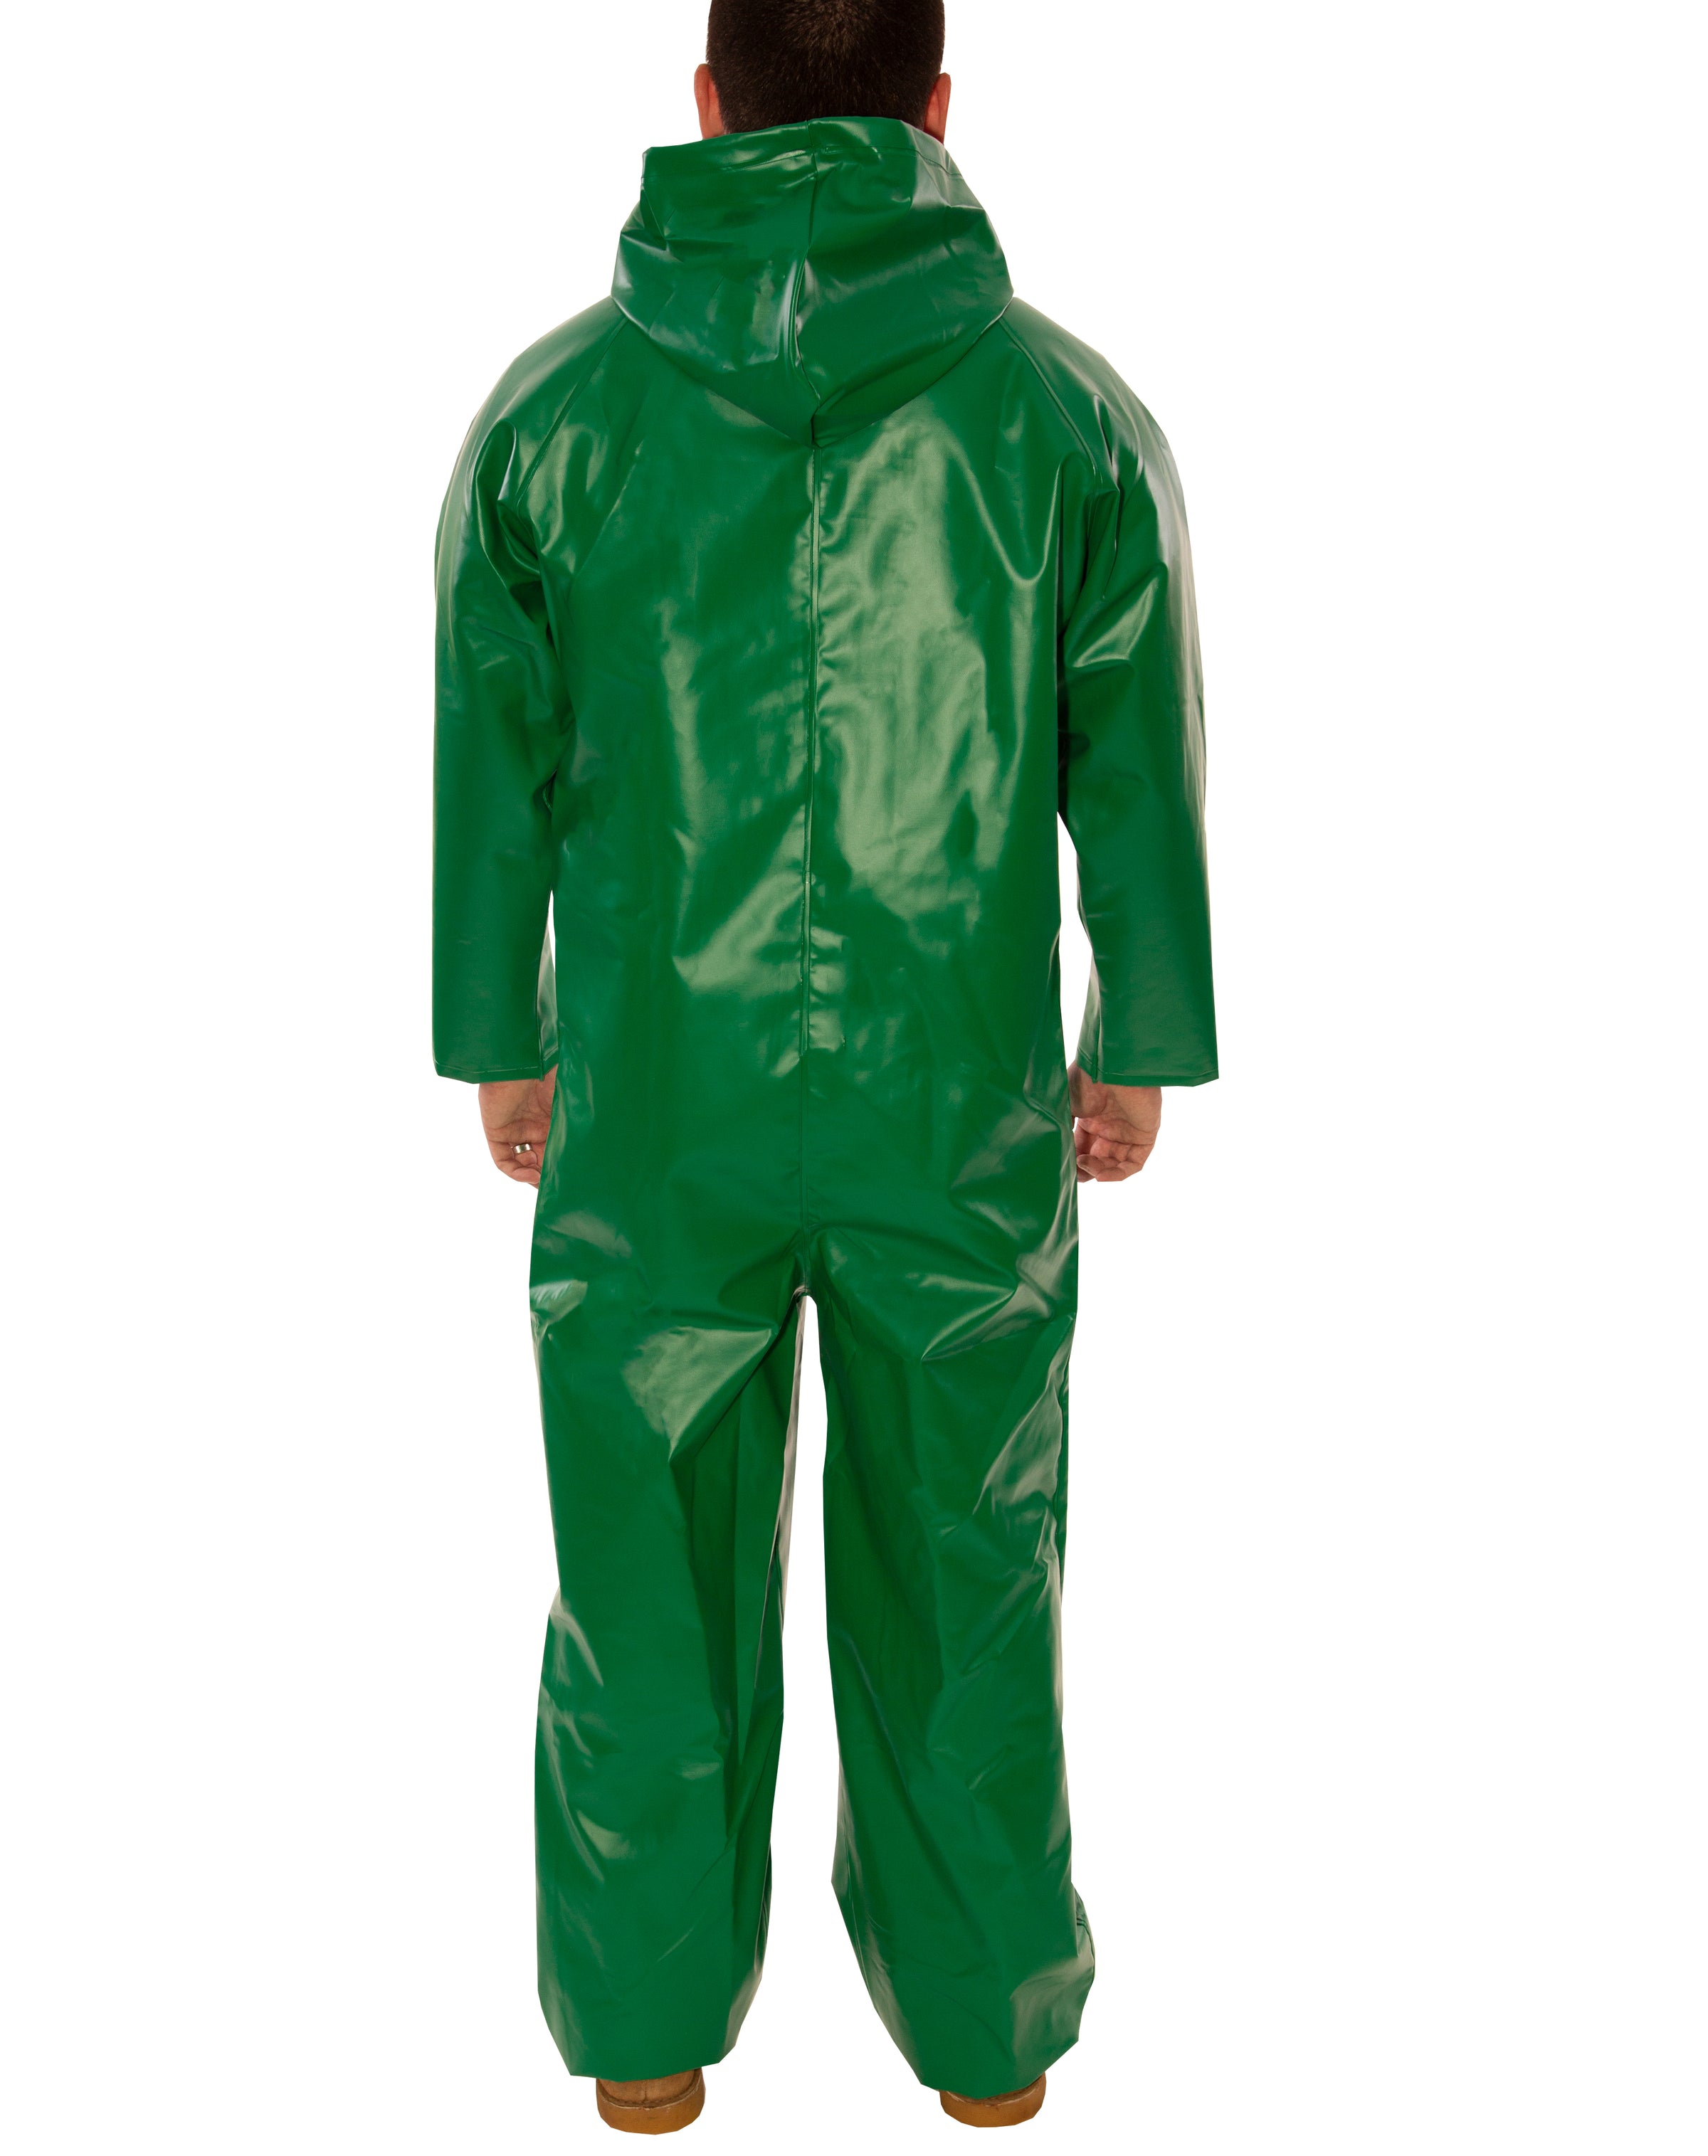 Safetyflex Coverall– Tingley Rubber USA